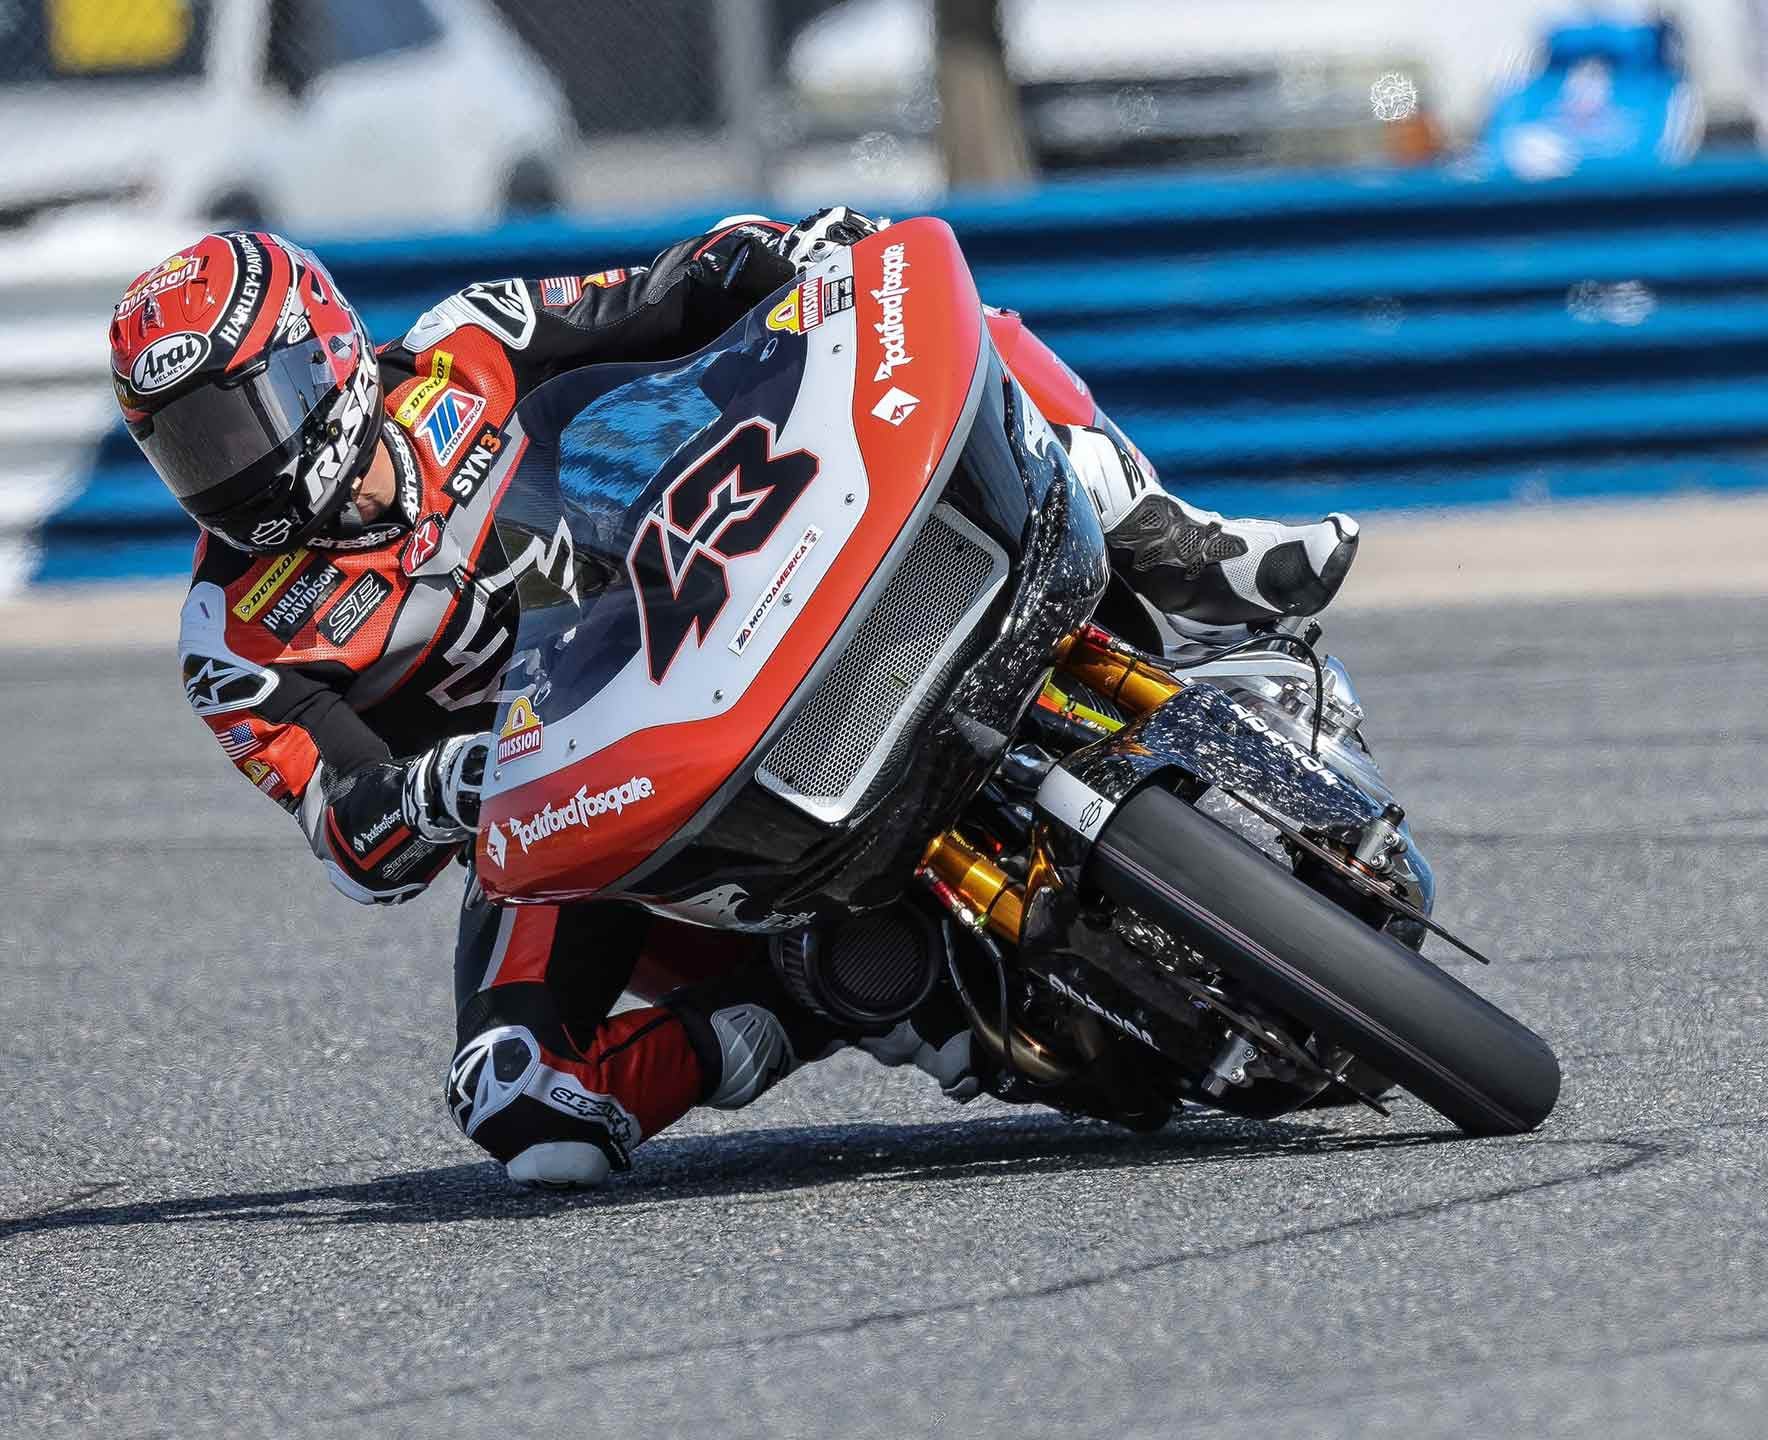 Look at the trickness of a MotoAmerica King of the Baggers racebike and compare that to those in the Superbike class; they are more similar than you may first think.